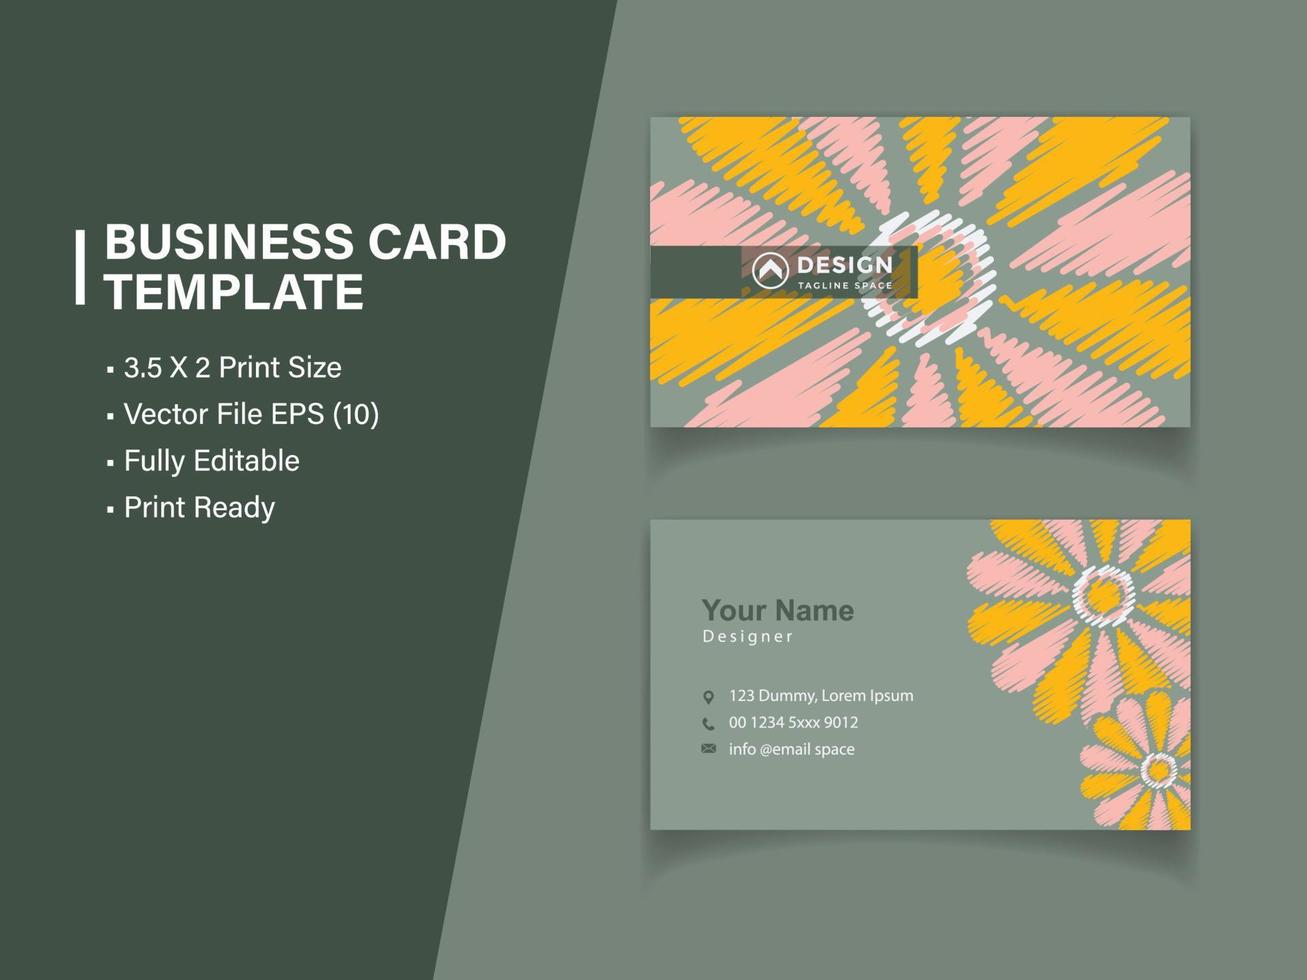 Floral business card template vector